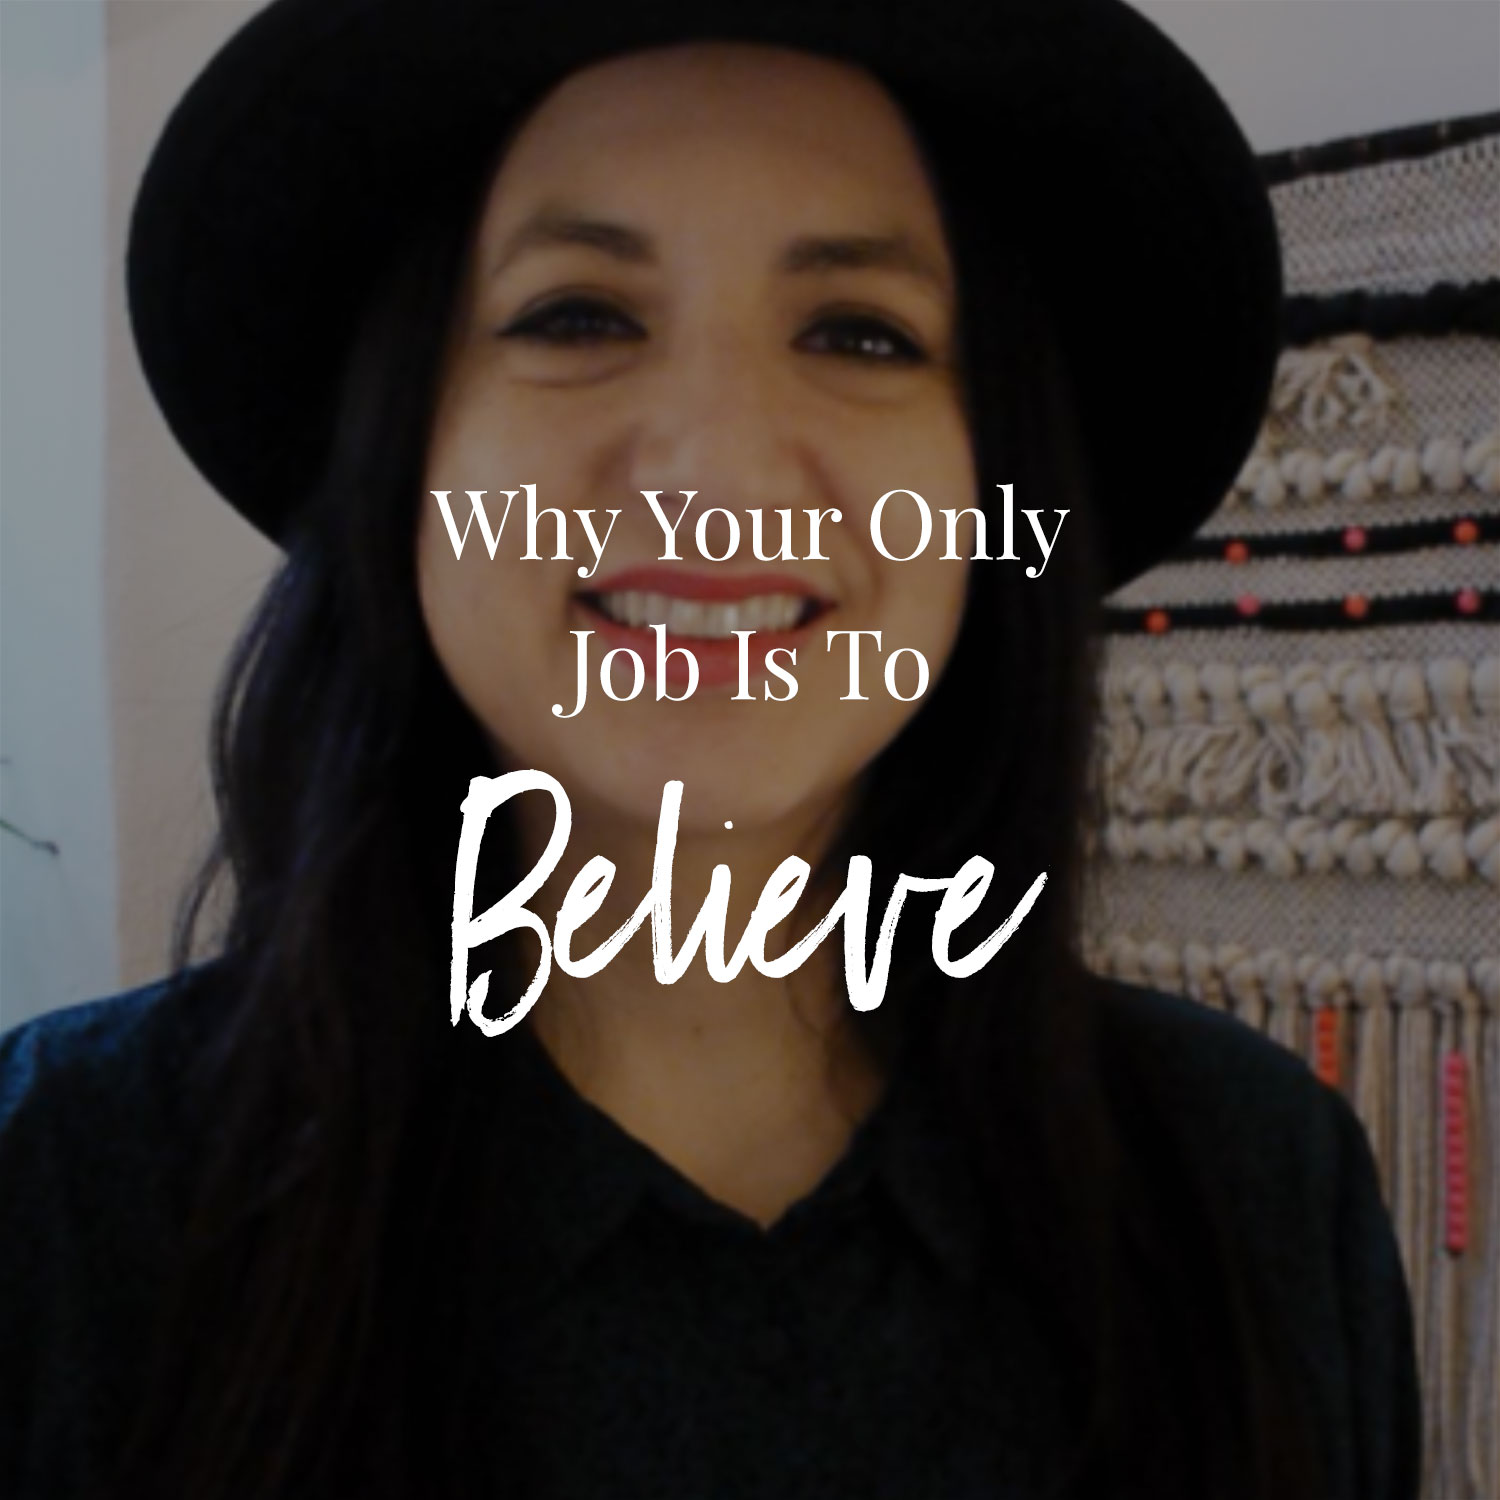 Why Your Only Job Is To Believe